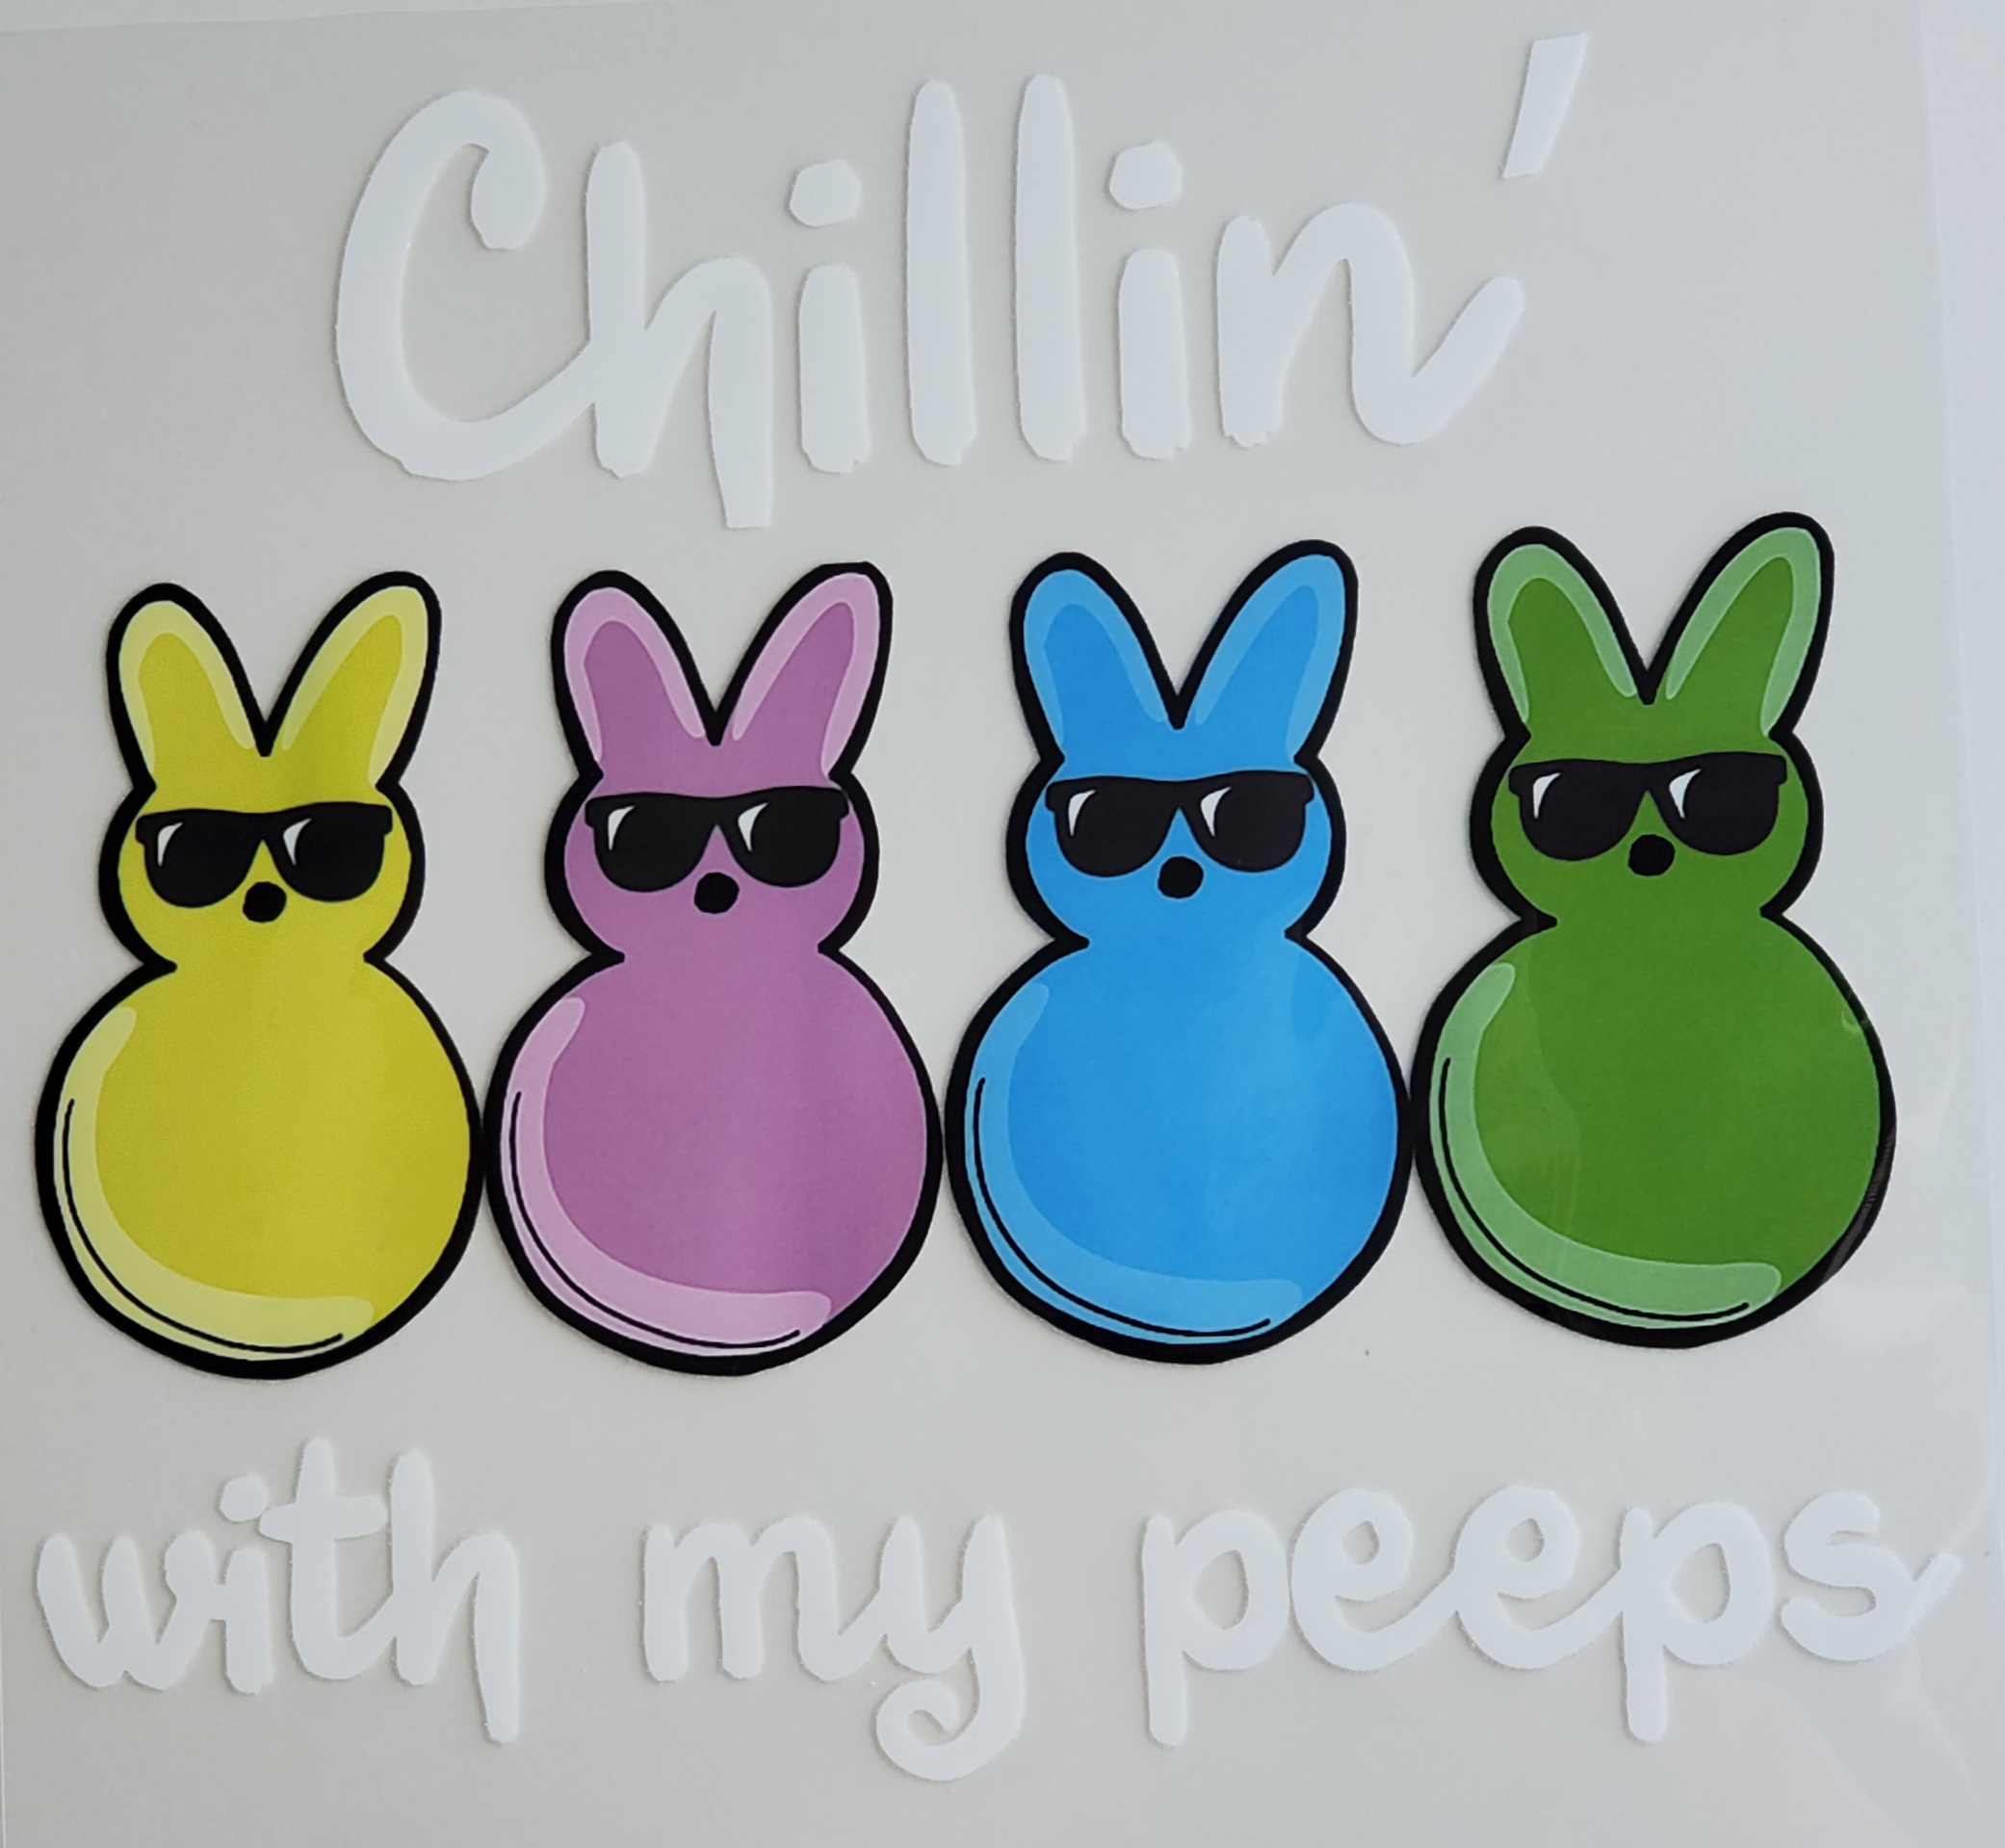 Chillin' With My Peeps – Graphic – Sis & Boogs